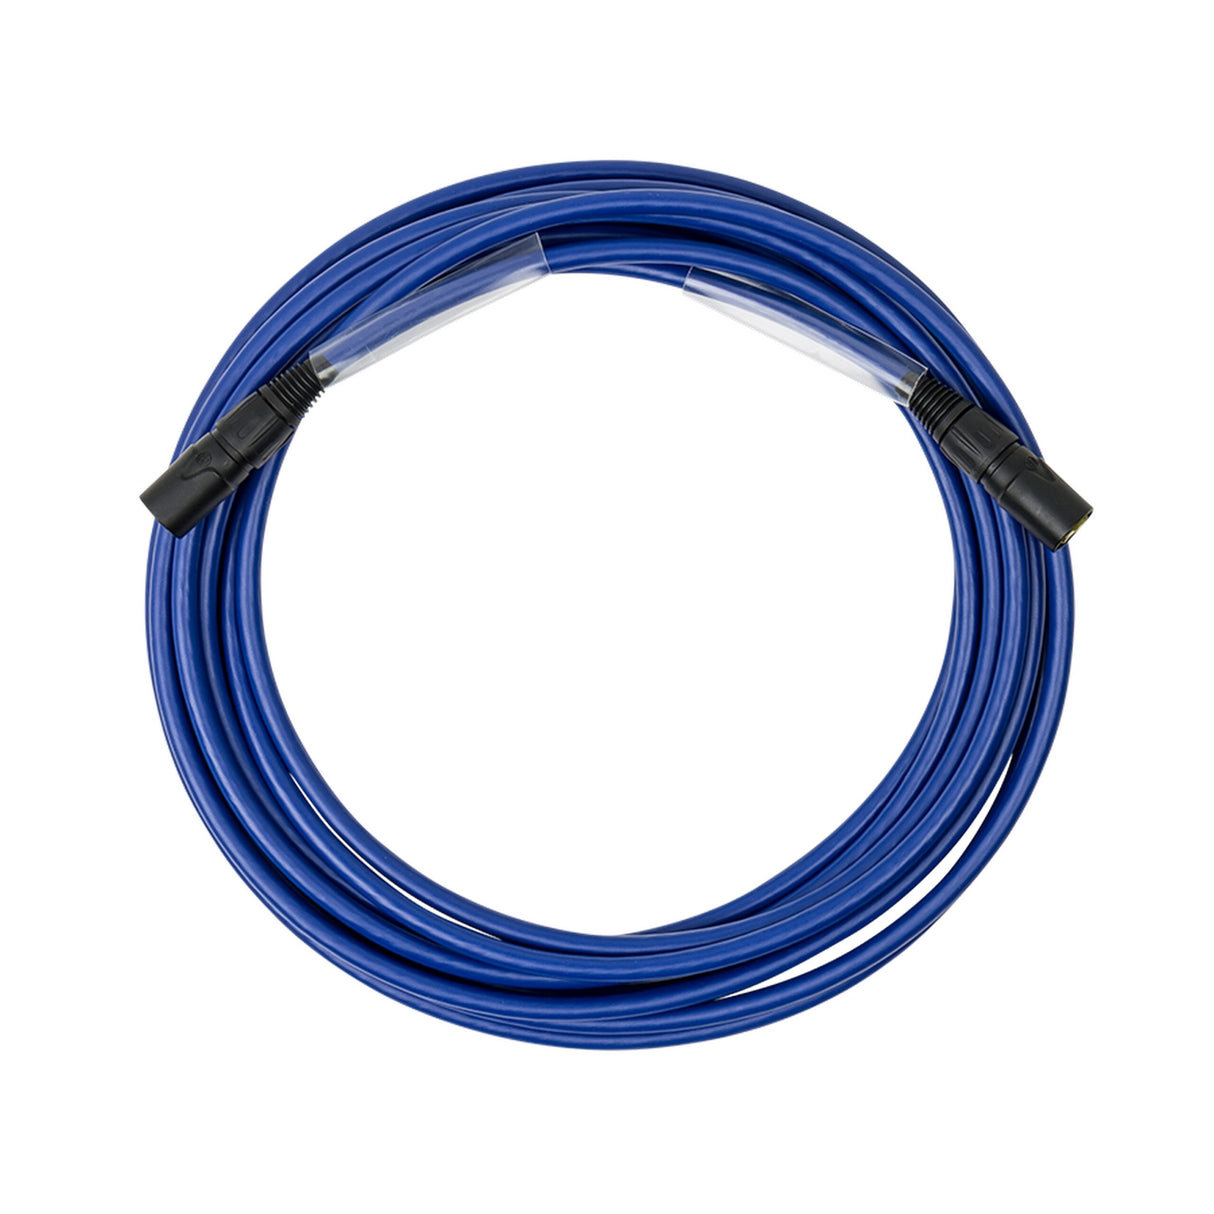 SoundTools SuperCAT Sound etherCON to etherCON CAT5e Cable, Blue, 60 Meter